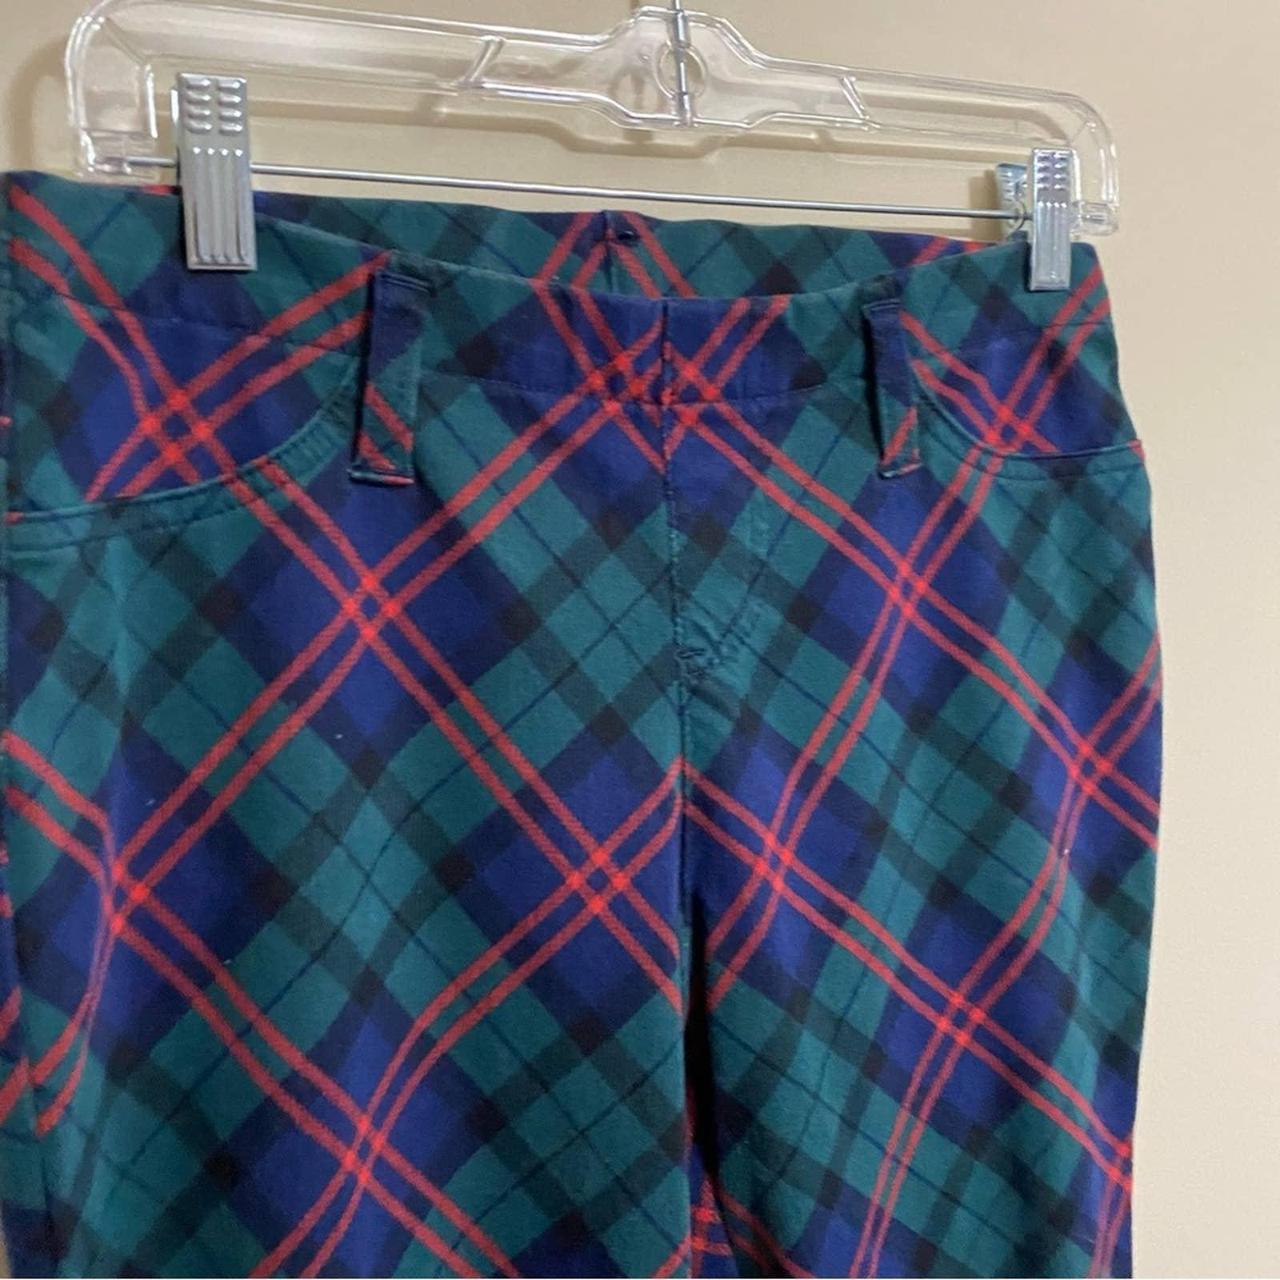 Faded Glory Jeggings Blue Green Red Plaid Stretch - Depop